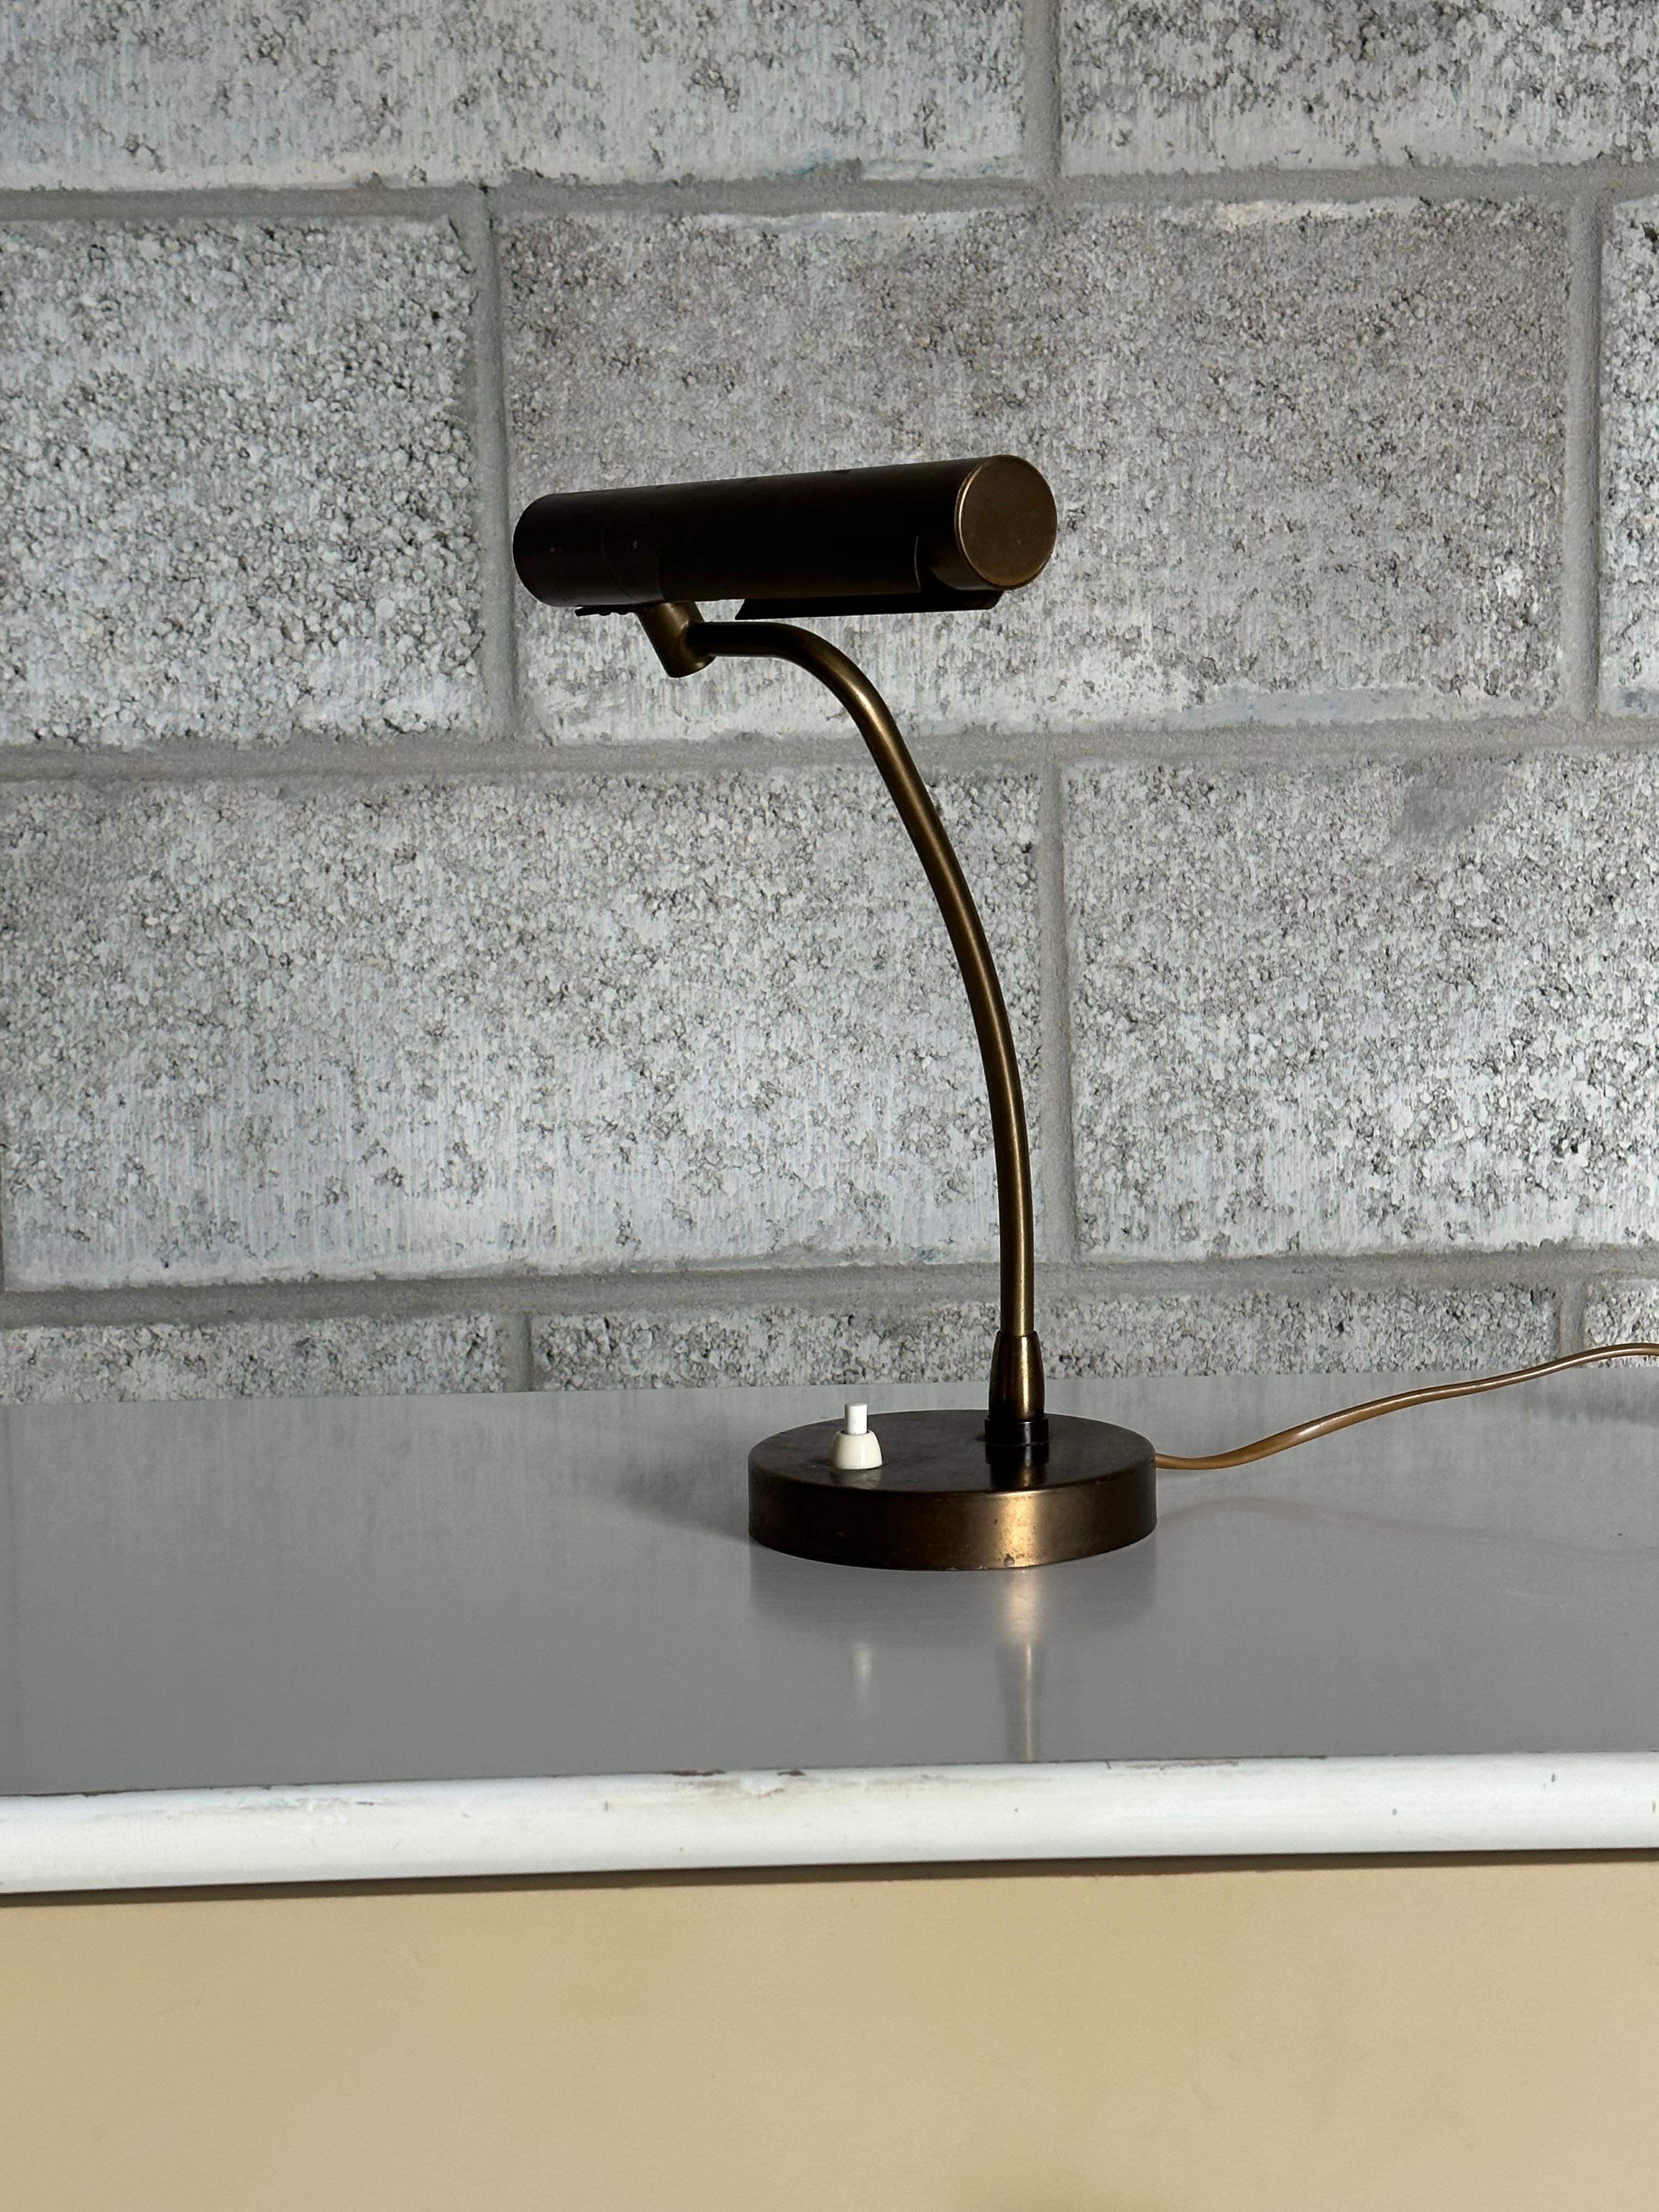 A wonderful brass lamp produced by Asea, very much in the style of a desk or banker lamp. Features a weighted brass base with push on/off button. An elongated curved stem continues up and to the side until reach the shade. Lamp has some degrees of